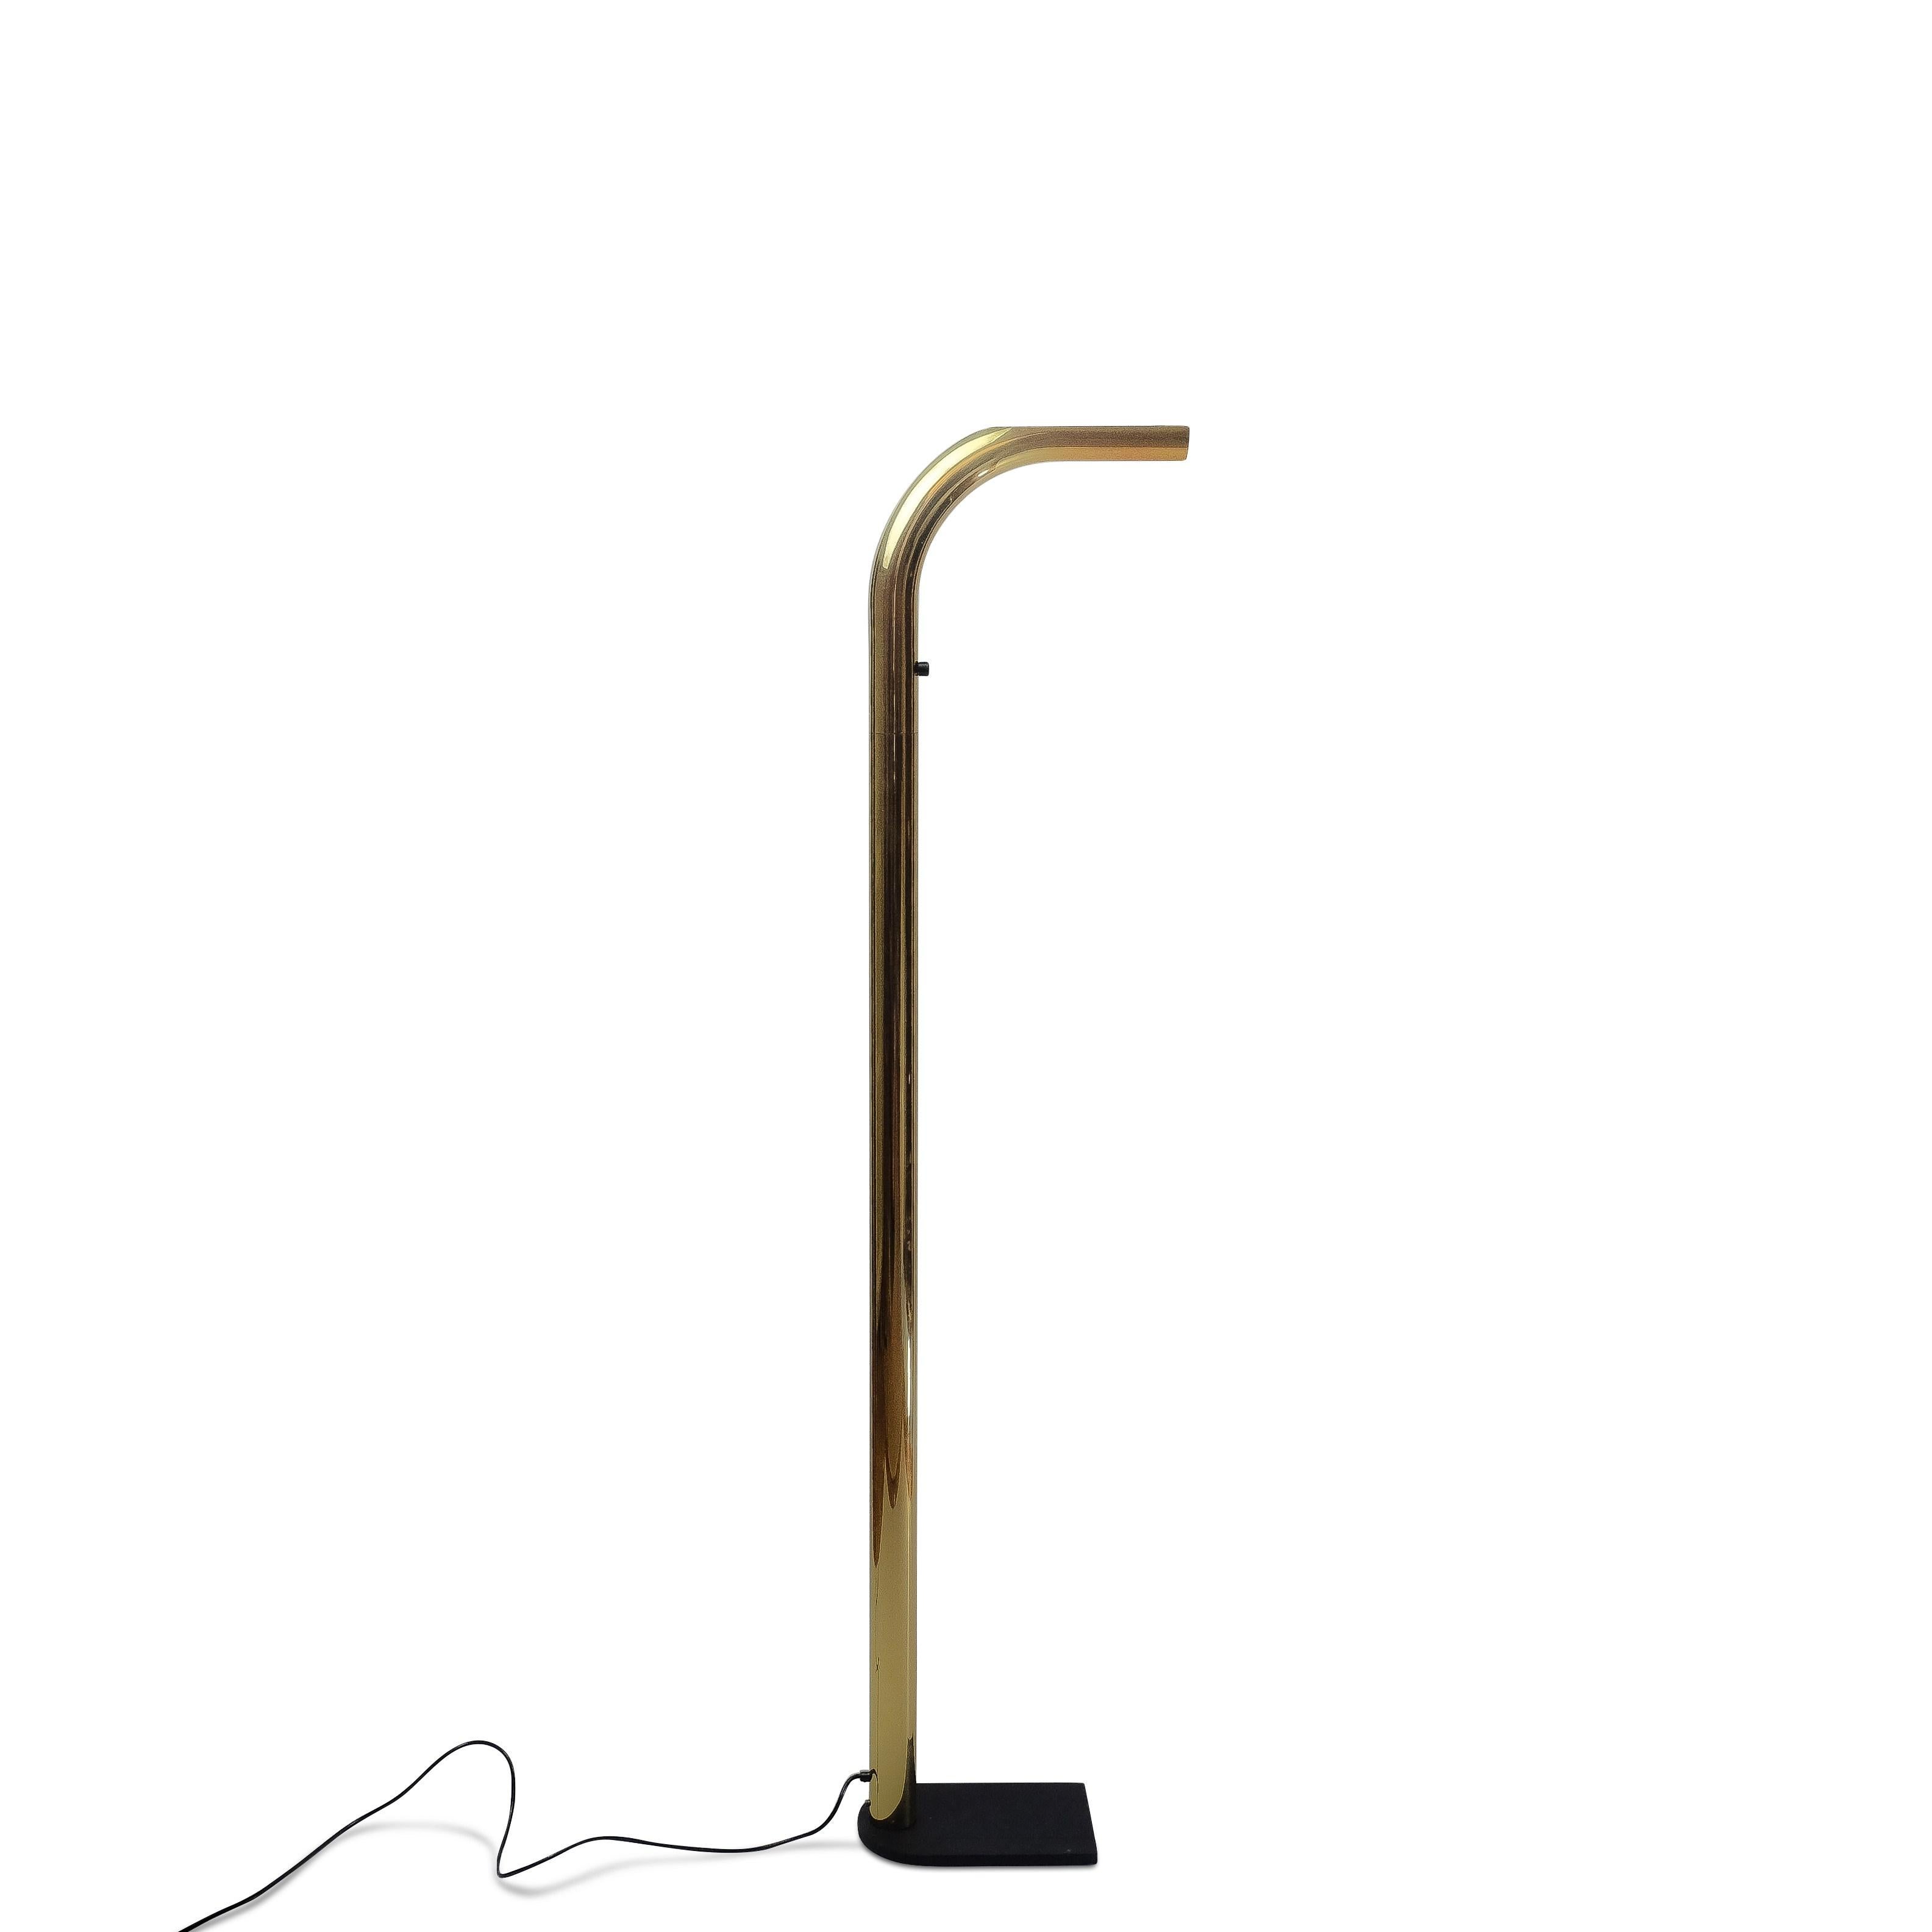 A tall standing floor lamp of Italian origin – produced by Eleusi, model Oca. The lamp is executed in a gold coloured metal (extremely rare) and features a dimmer that regulates the upward light beam, thus providing an indirect light source. This